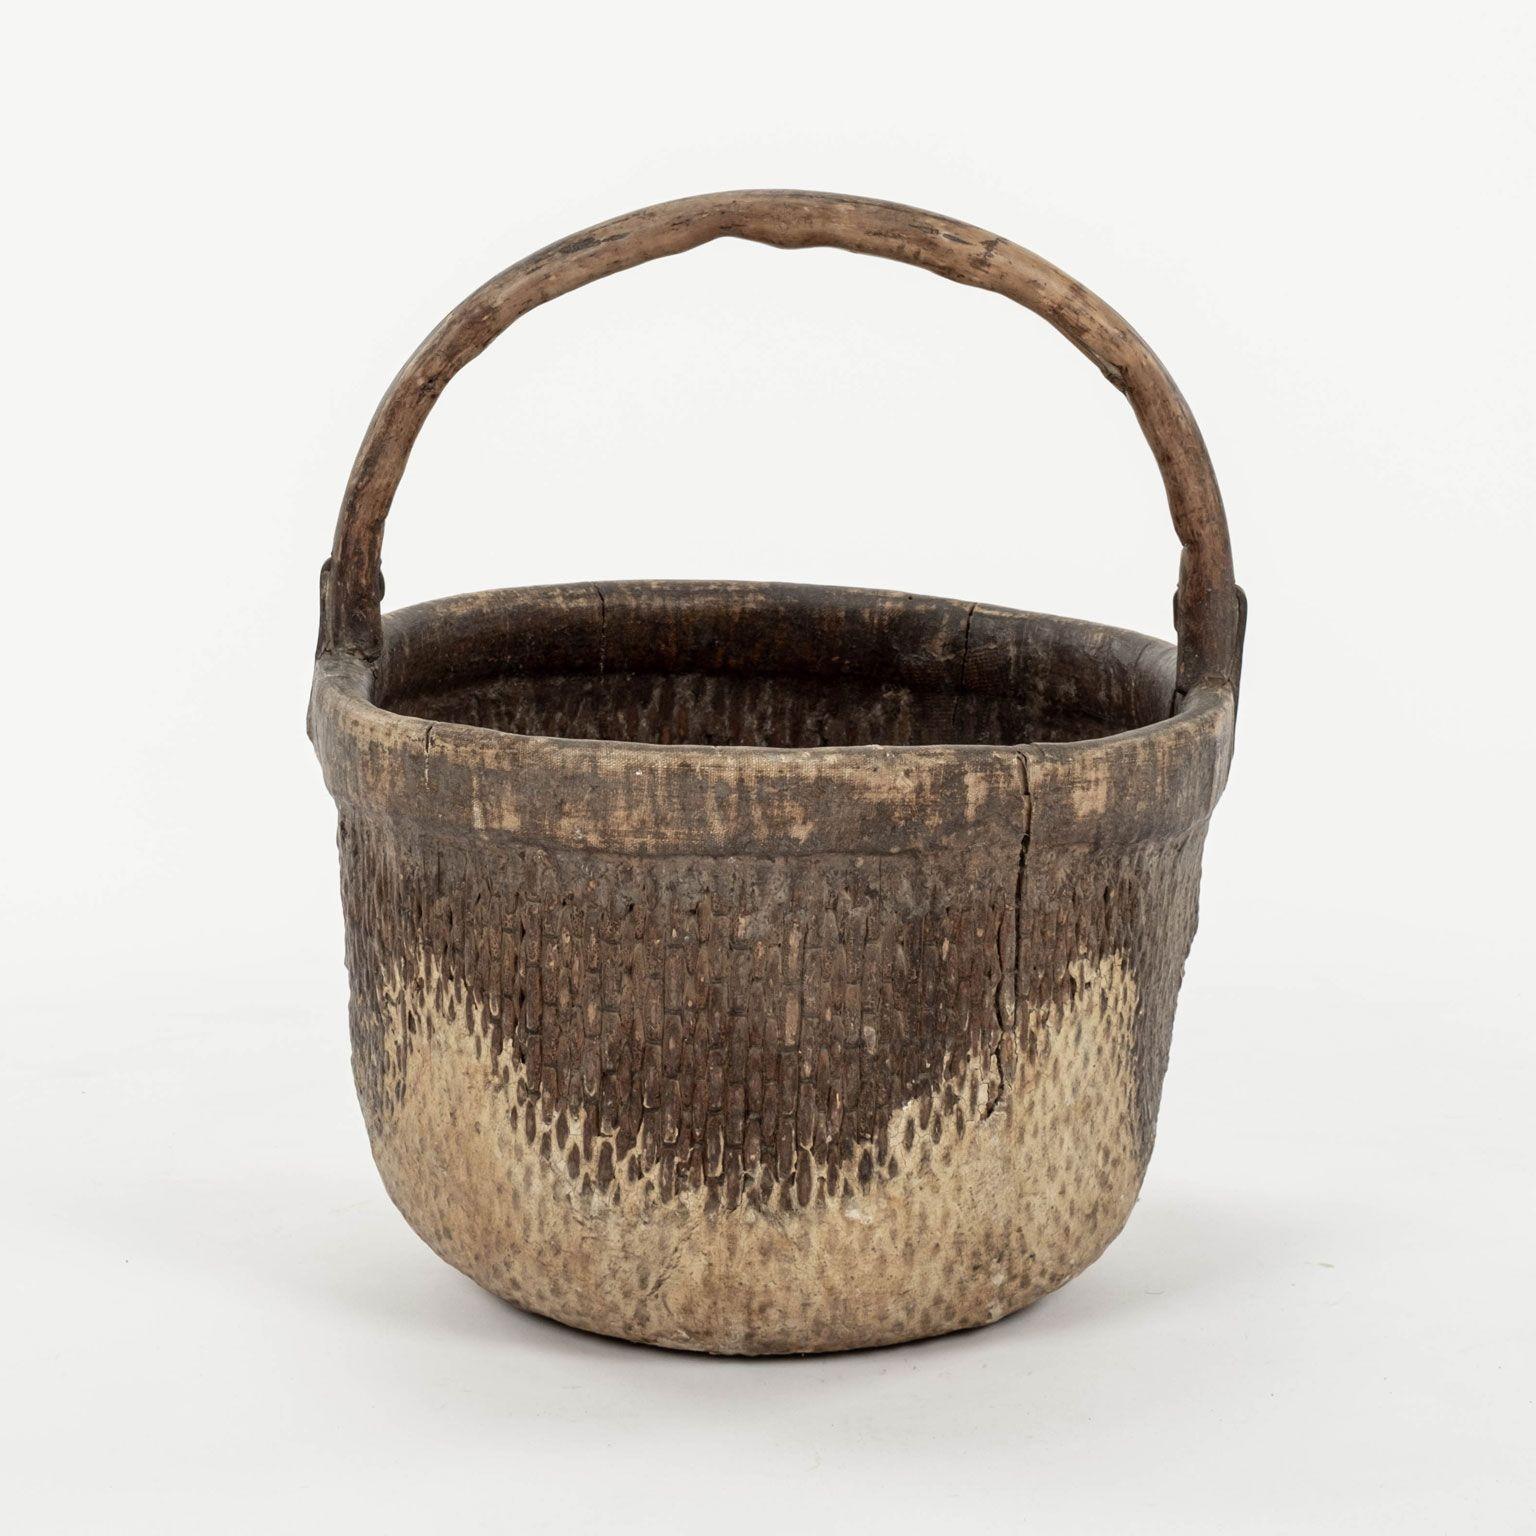 Mid-20th century woven Chinese rice basket with handle. Hand-woven willow with elm handle. Beautiful faded patina and texture from decades of wear. Three baskets available (see pictures). Baskets are sold individually and priced $1,400 each.

Note: